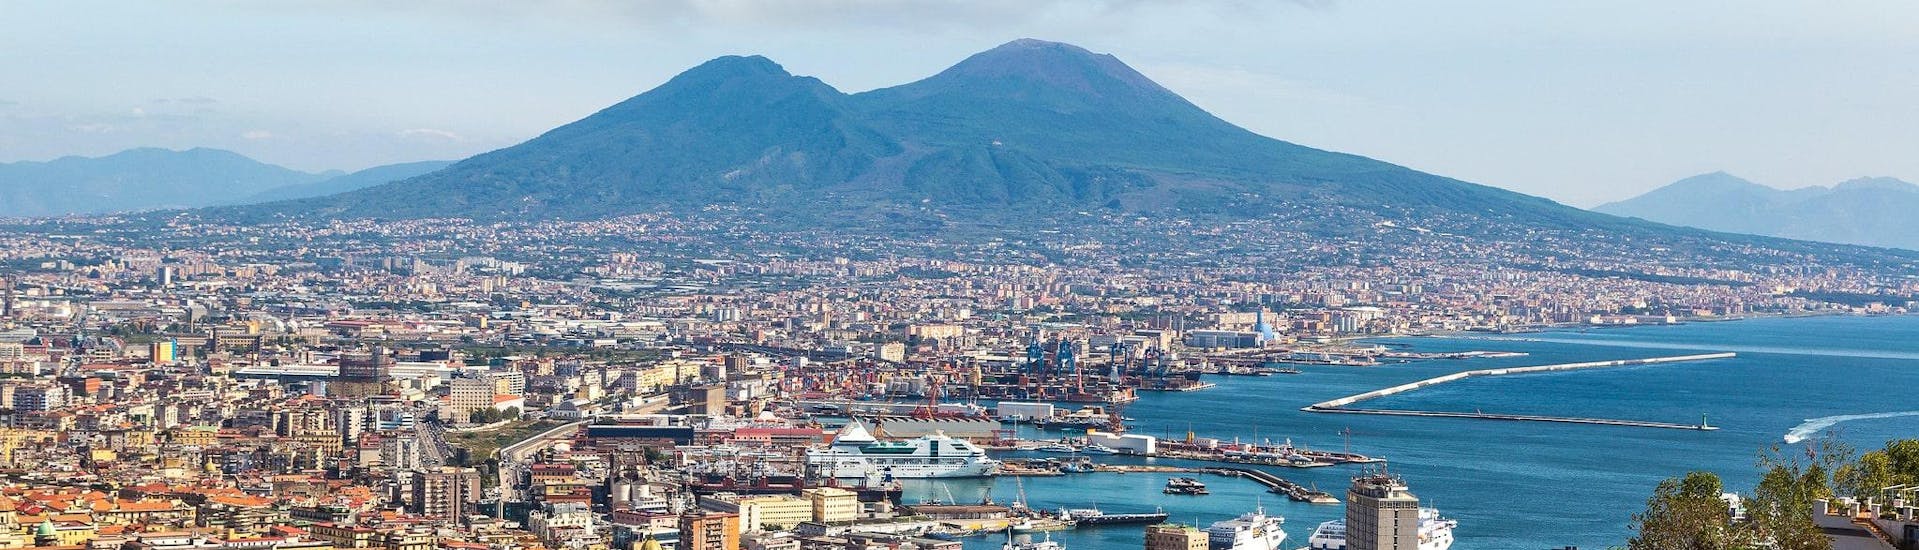 View of the city of Naples with Mount Vesuvius in the background, from where many boat trips to Capri and the Amalfi Coast start.